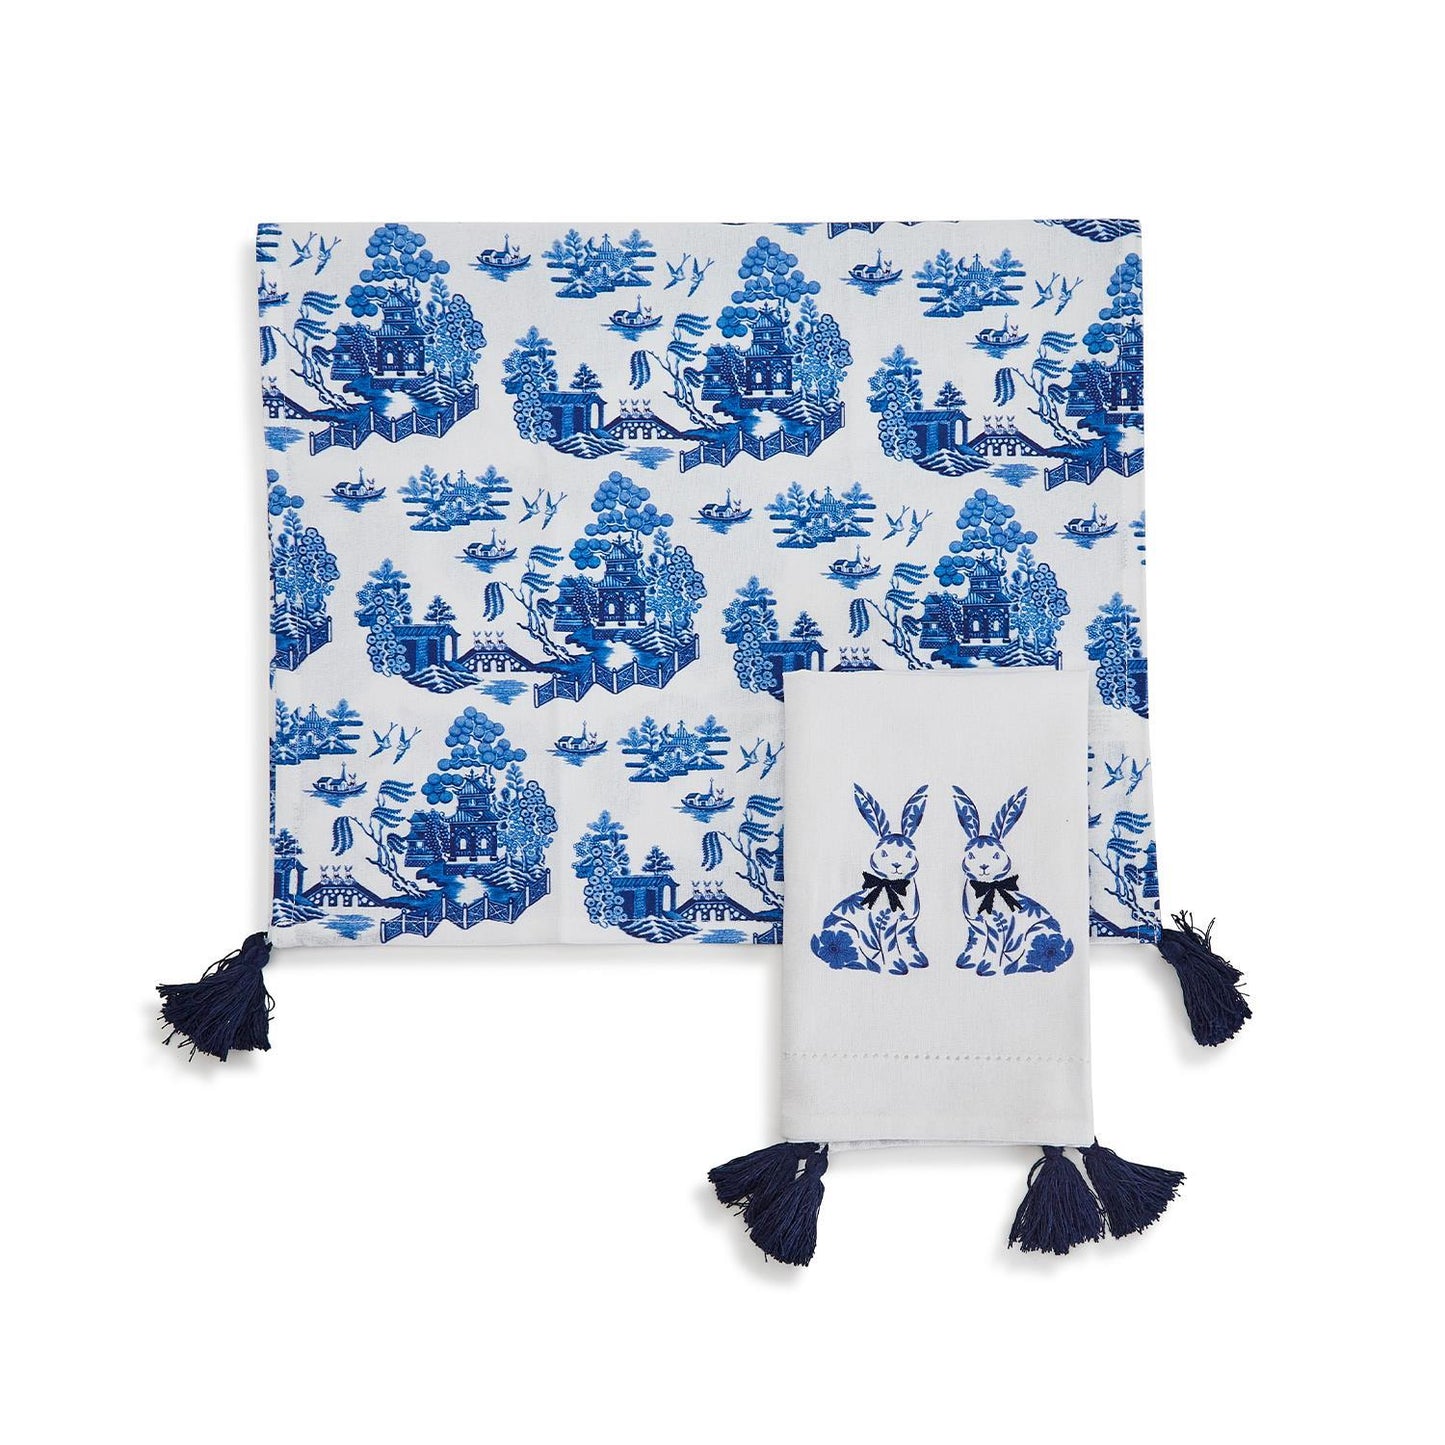 Chinoiserie Bunny Towels